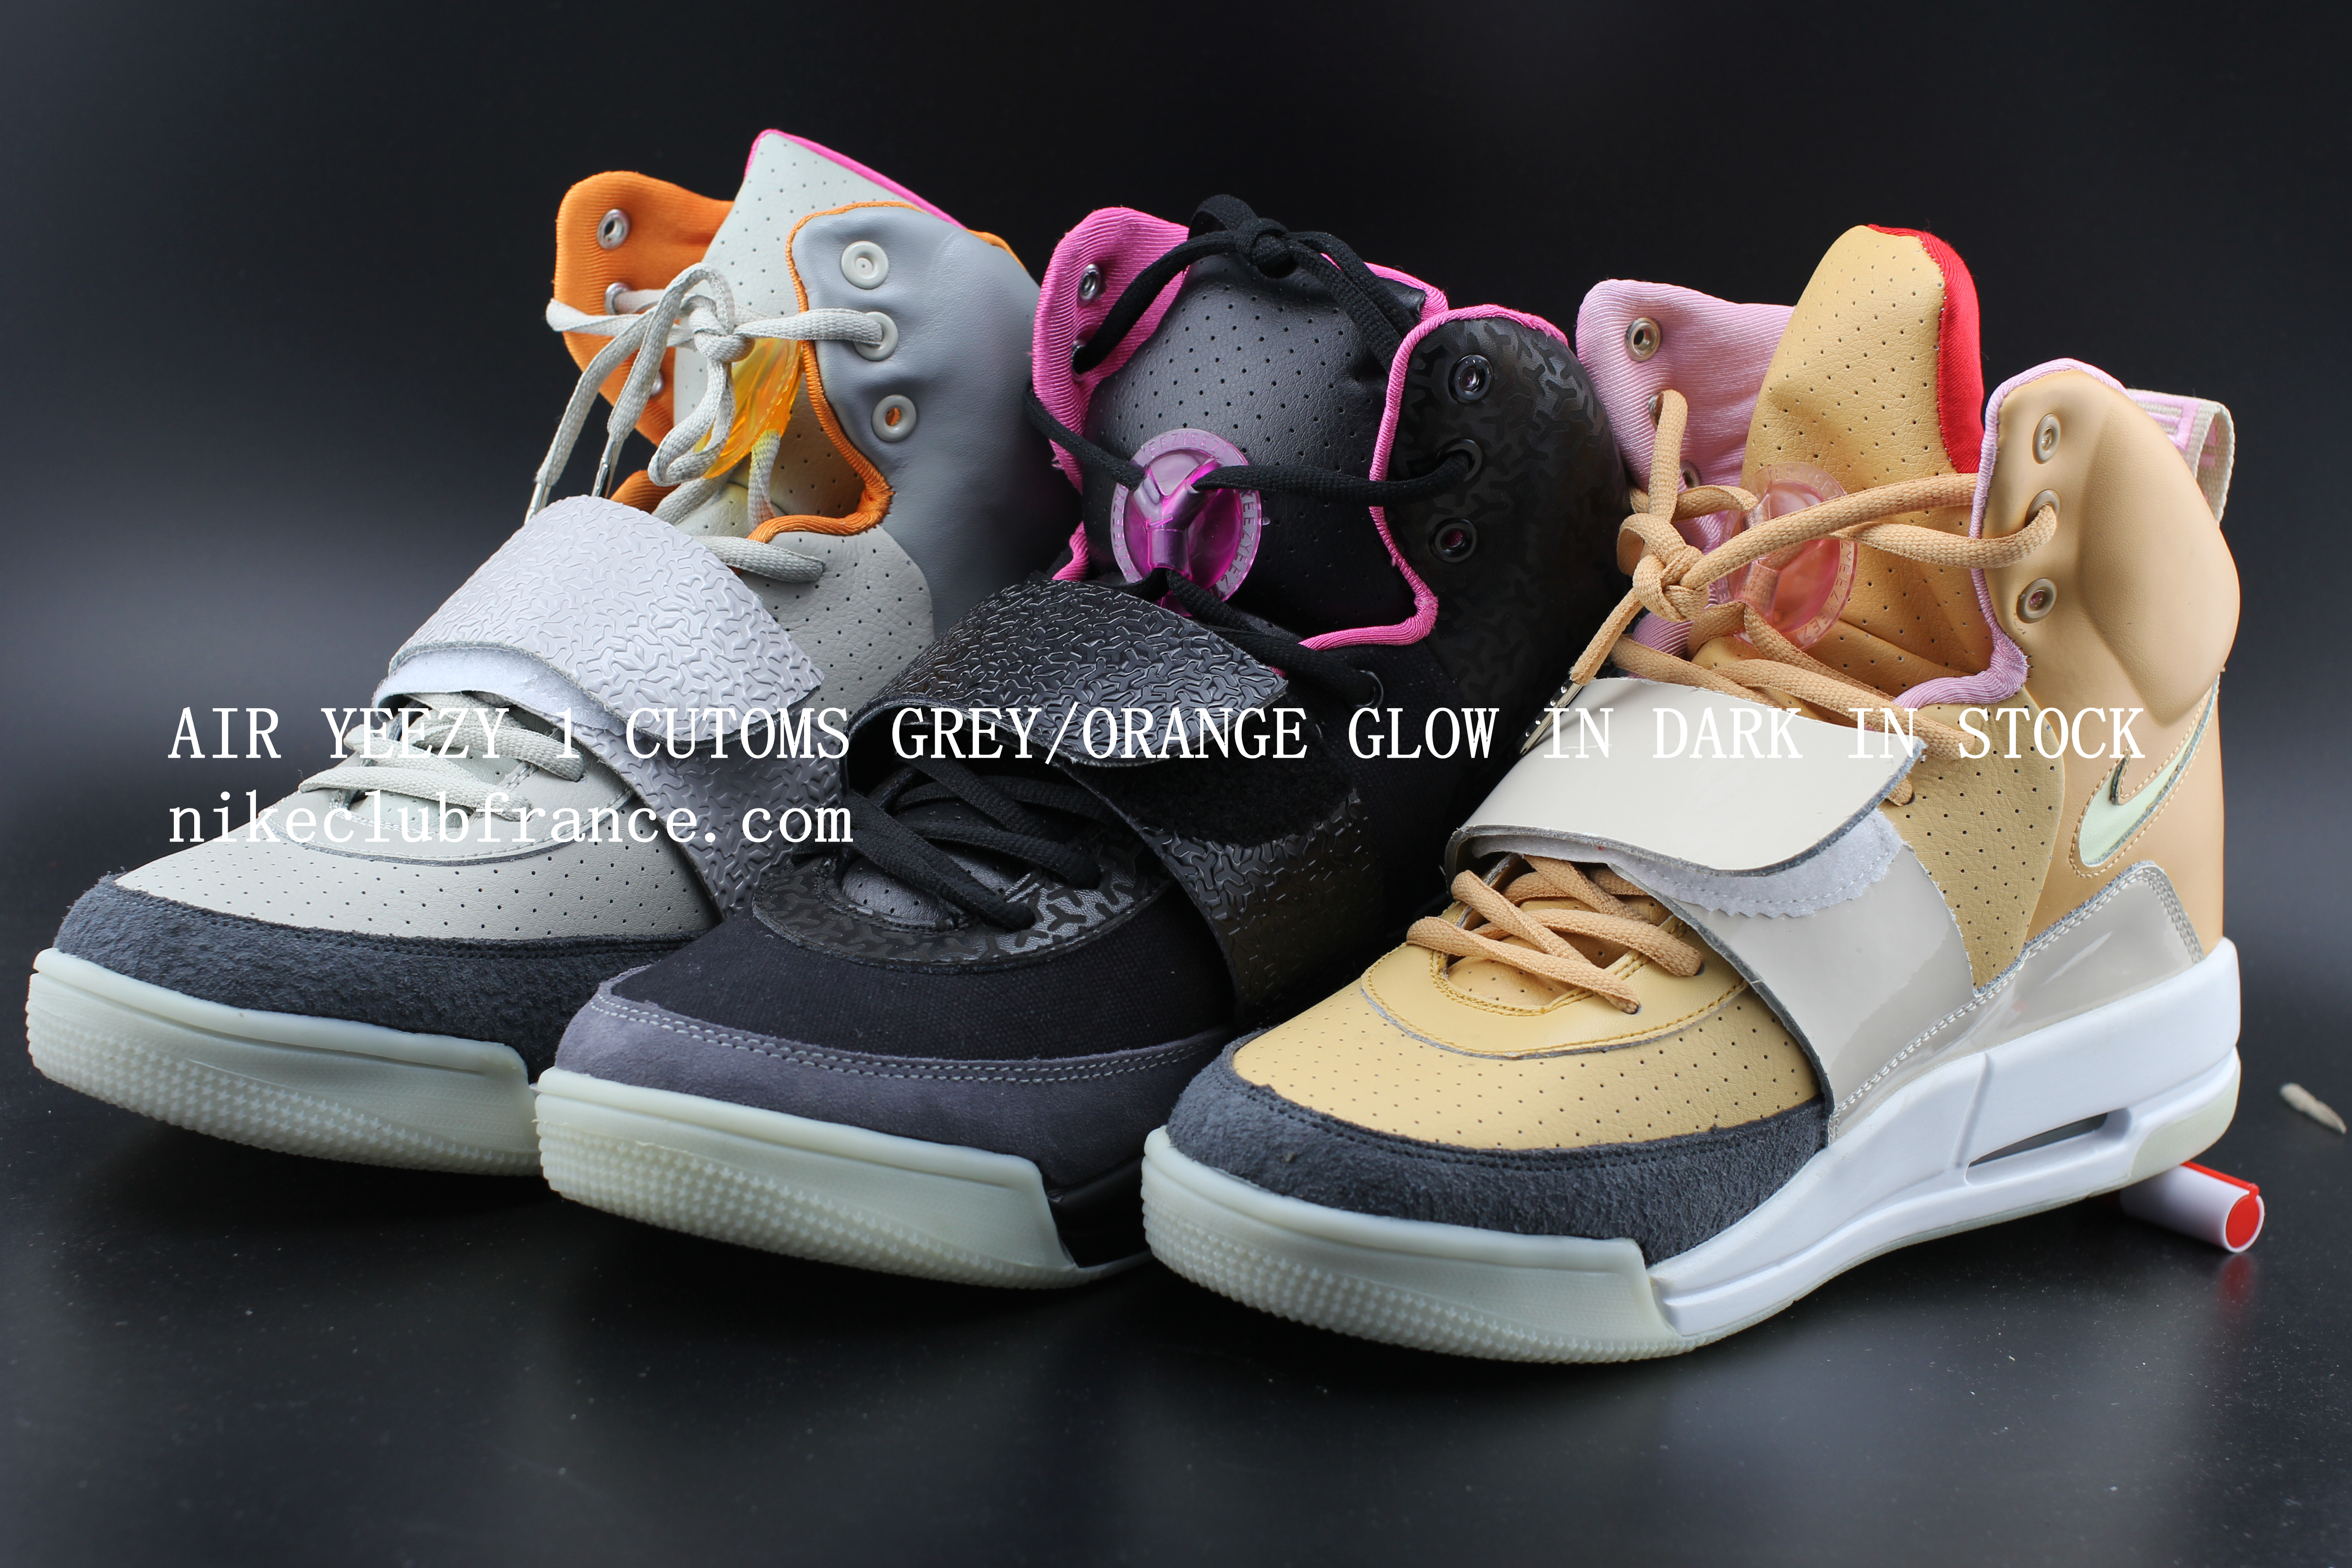 air yeezy 1 for sale